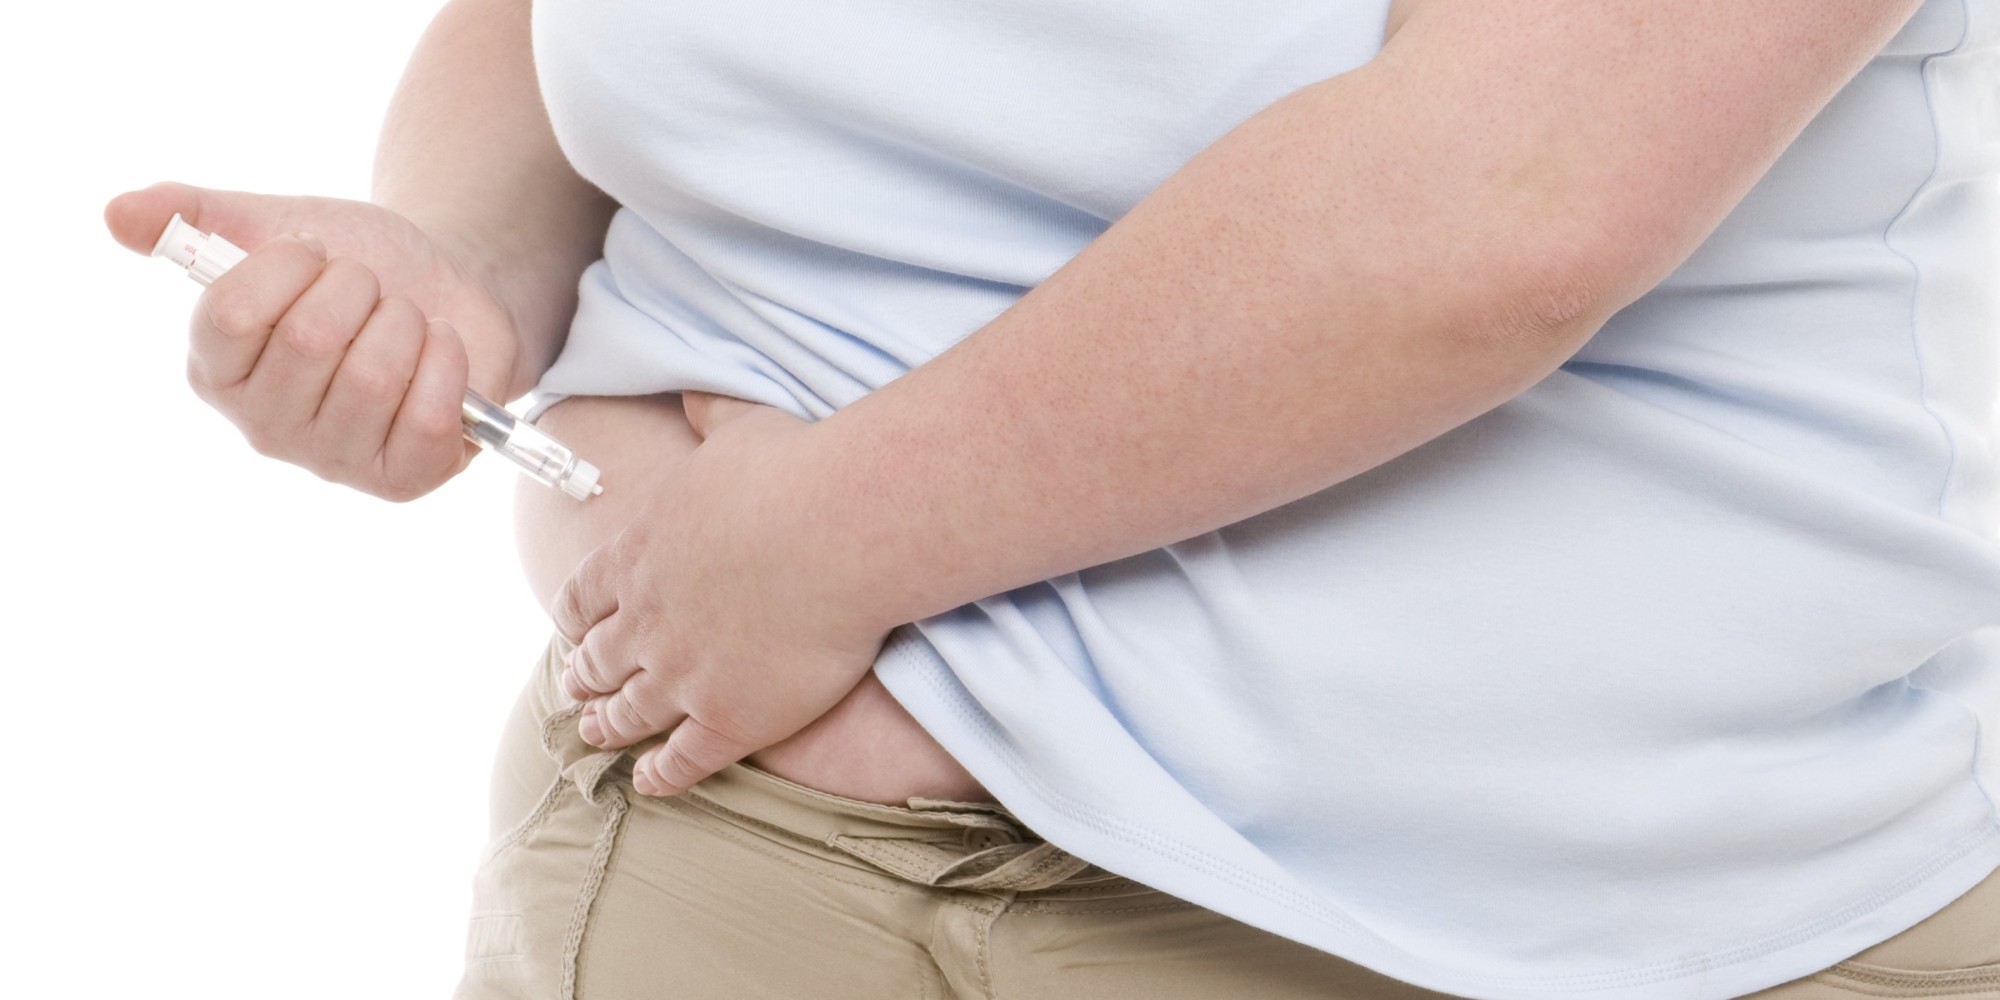 Fda Approves An Injection For Obesity With Blockbuster